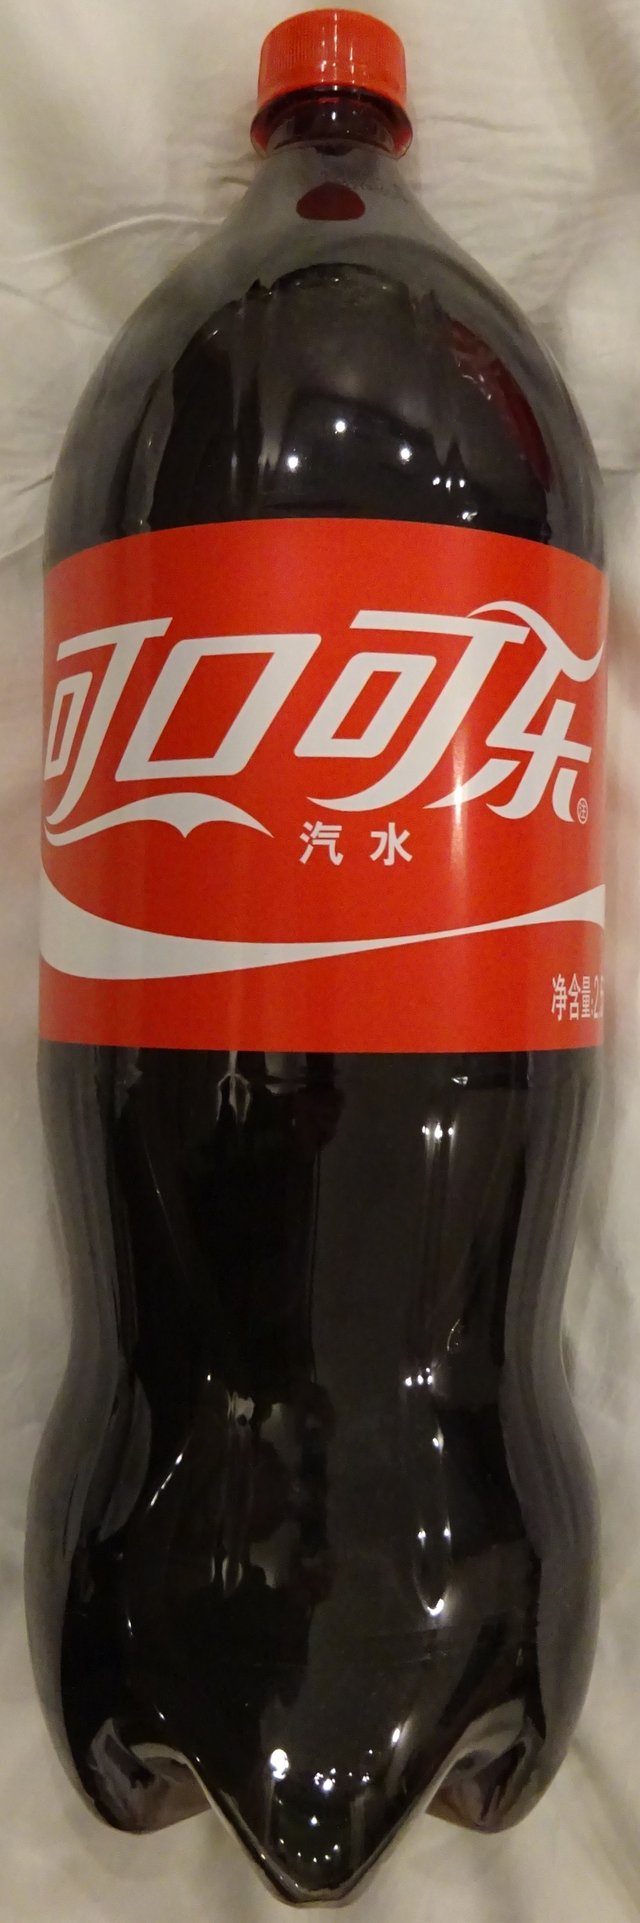 As sold in China